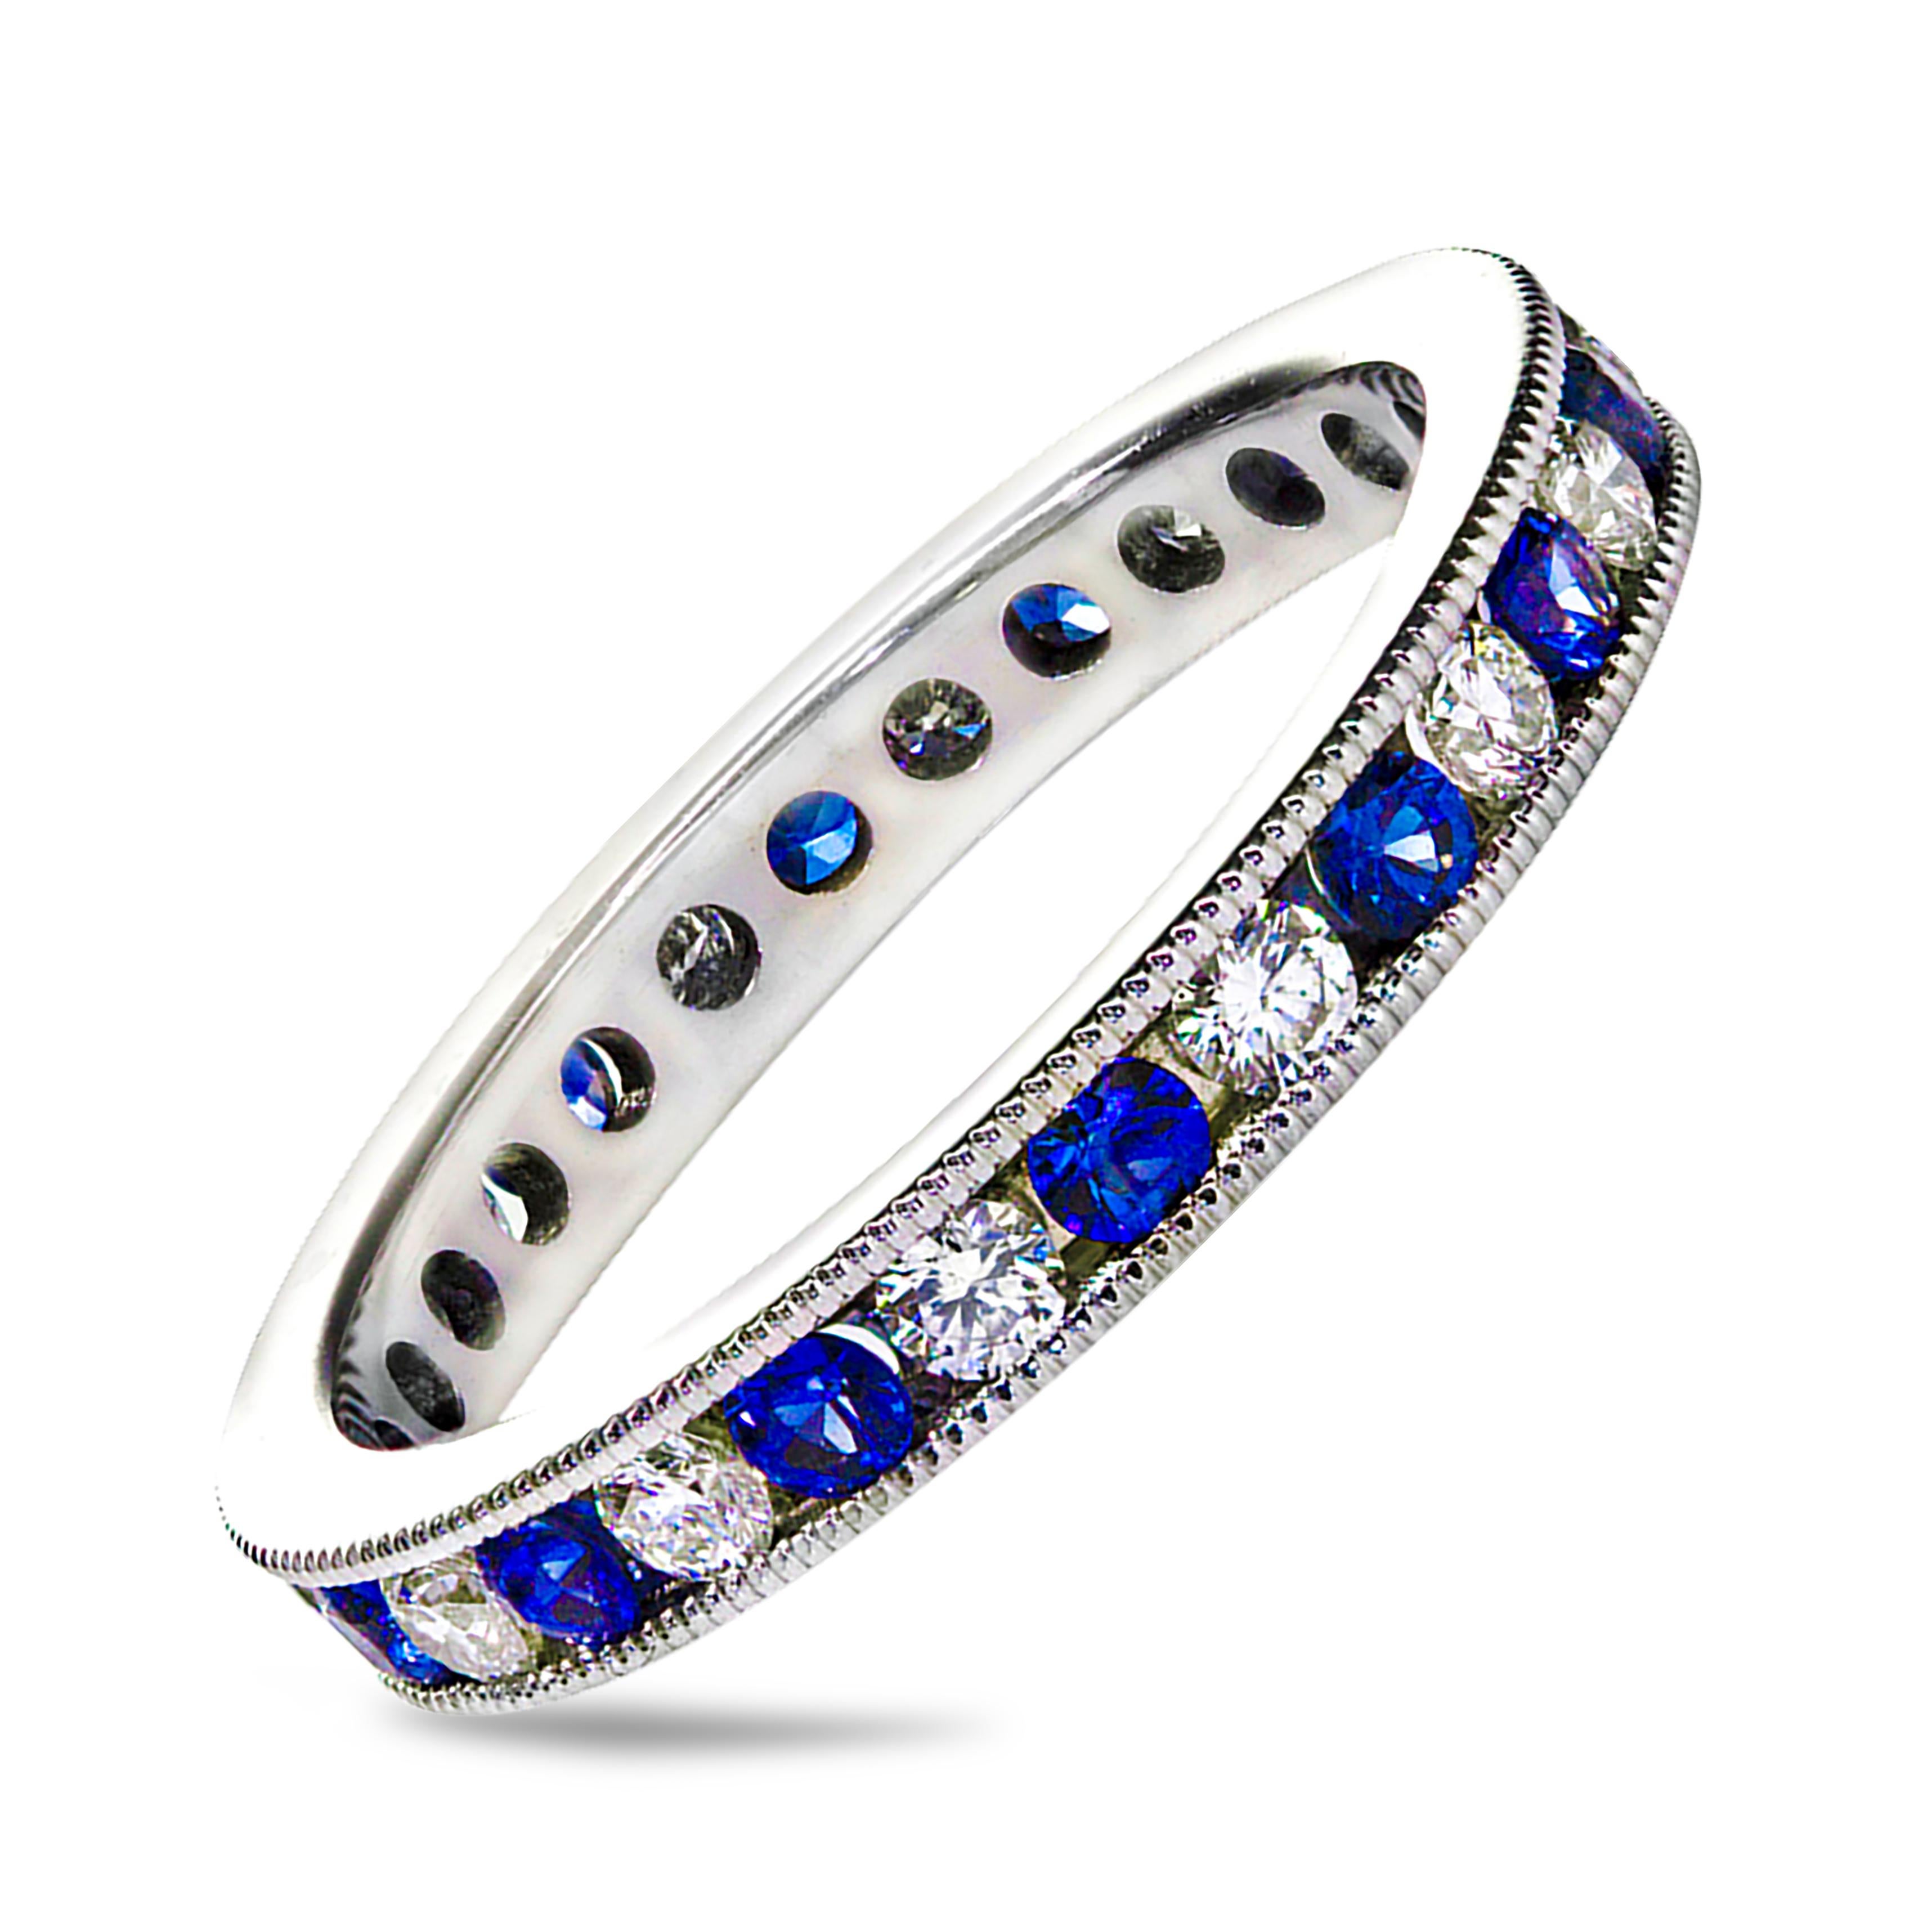 A well-crafted wedding band showcasing round cut blue sapphires weighing 0.62 carats, elegantly alternating with round white diamonds weighing 0.50 carats total. Channel set and Finished with intricate milgrain edges. Made with 18K White Gold. Size